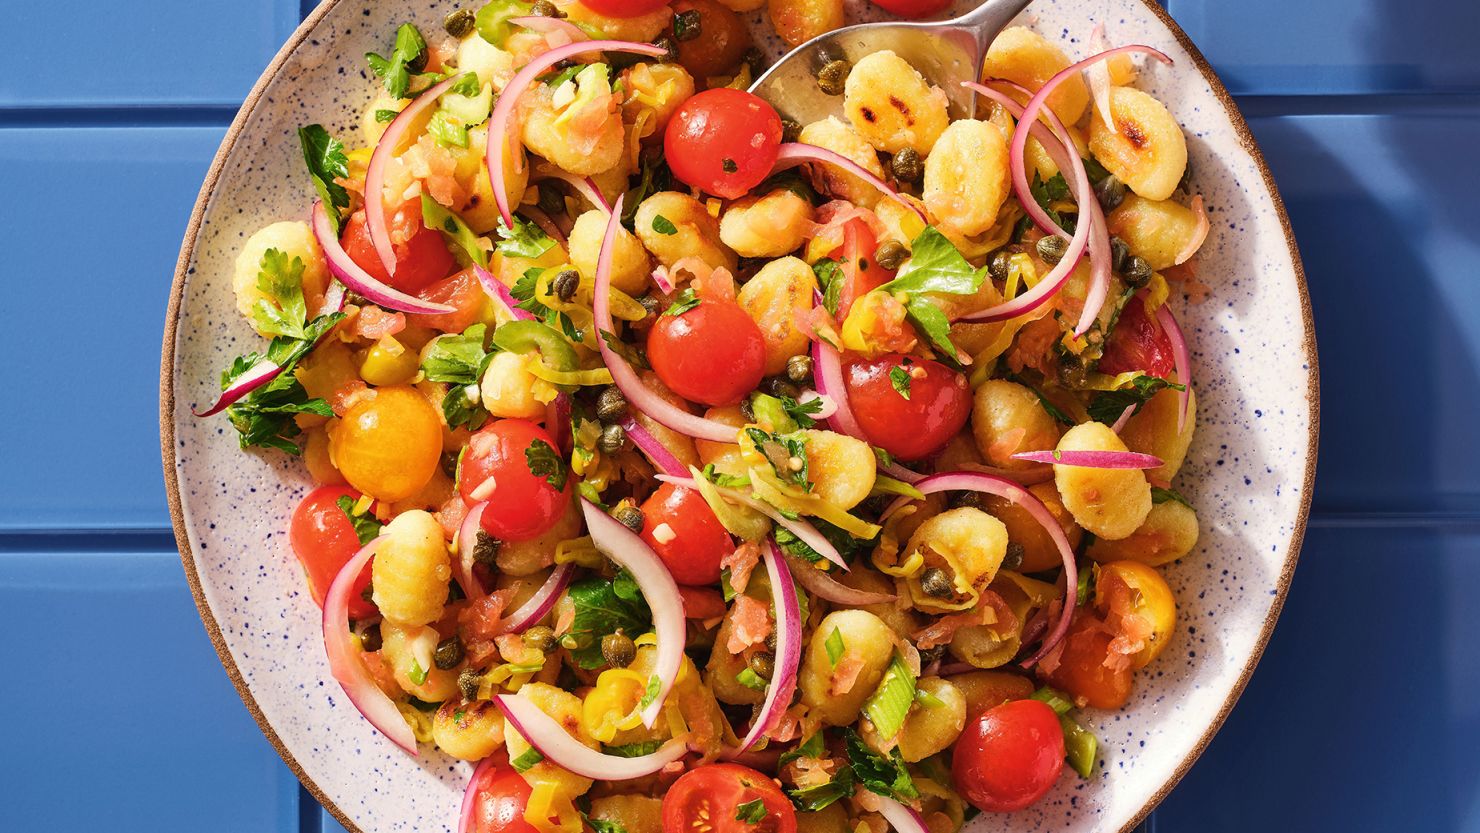 Dan Pashman's recipe for Crispy Gnocchi Salad With Preserved Lemon-Tomato Dressing is inspired by a Moroccan starter salad typically made with tomato and preserved lemon.